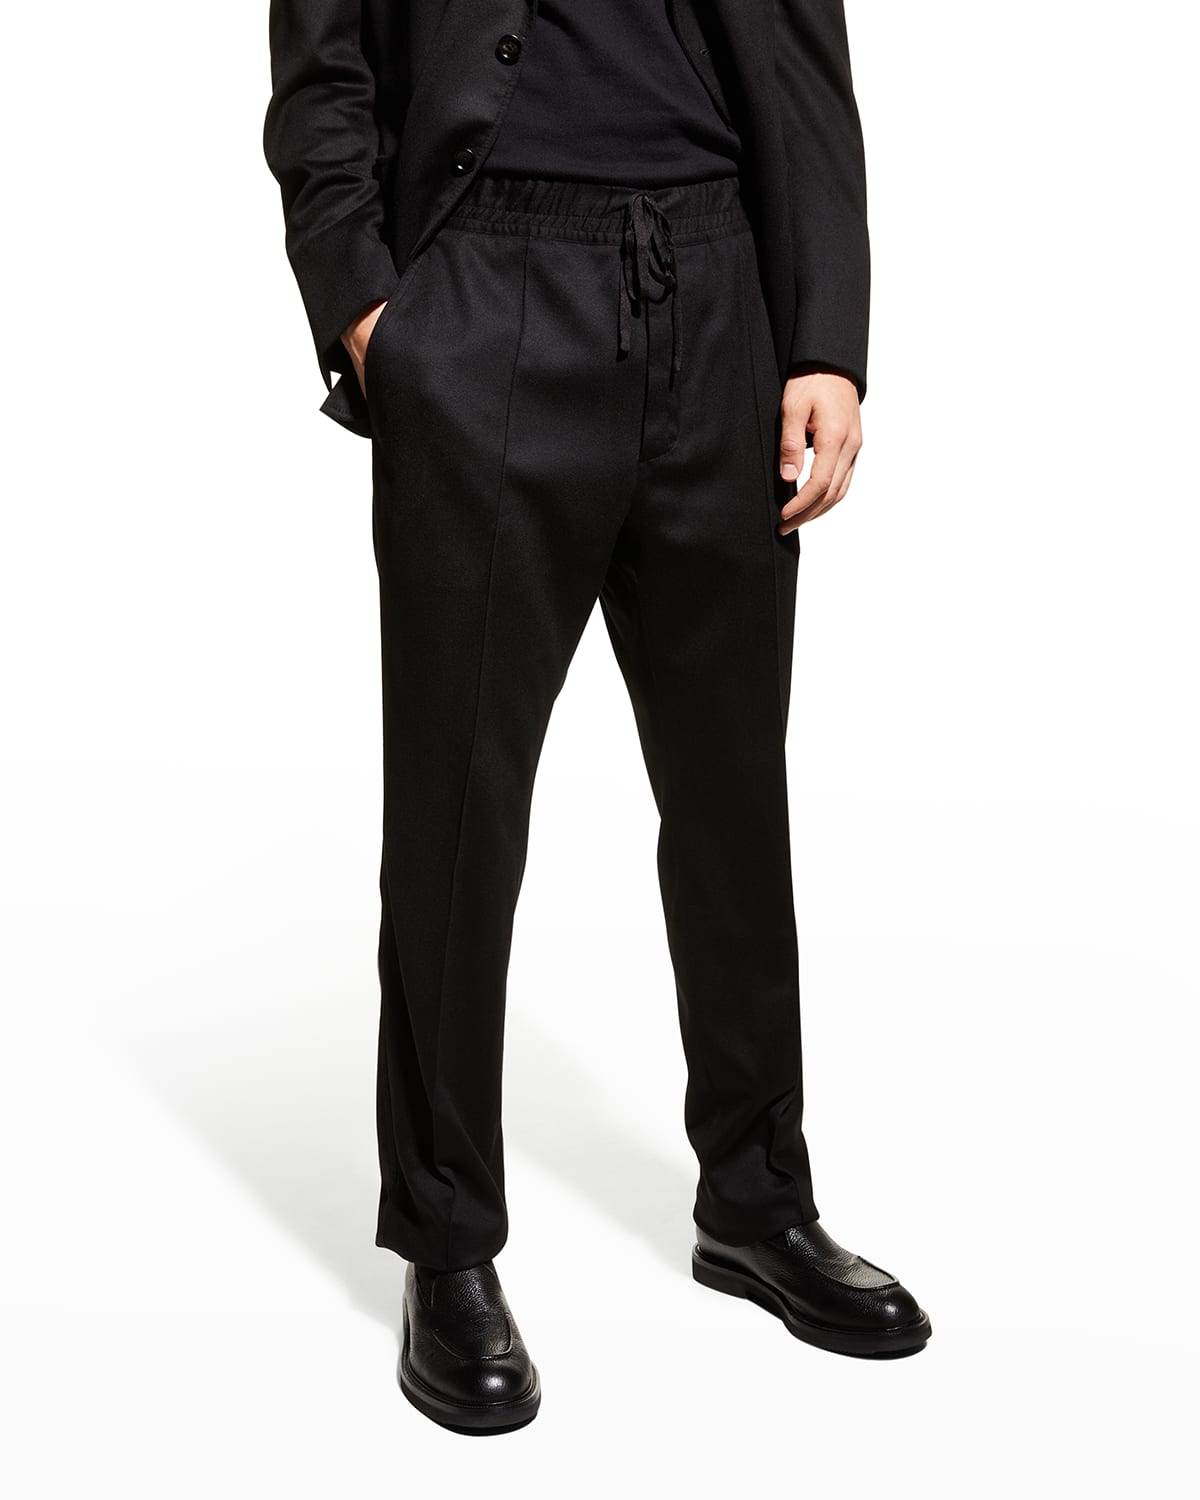 Men's Solid Cashmere Twill Trousers